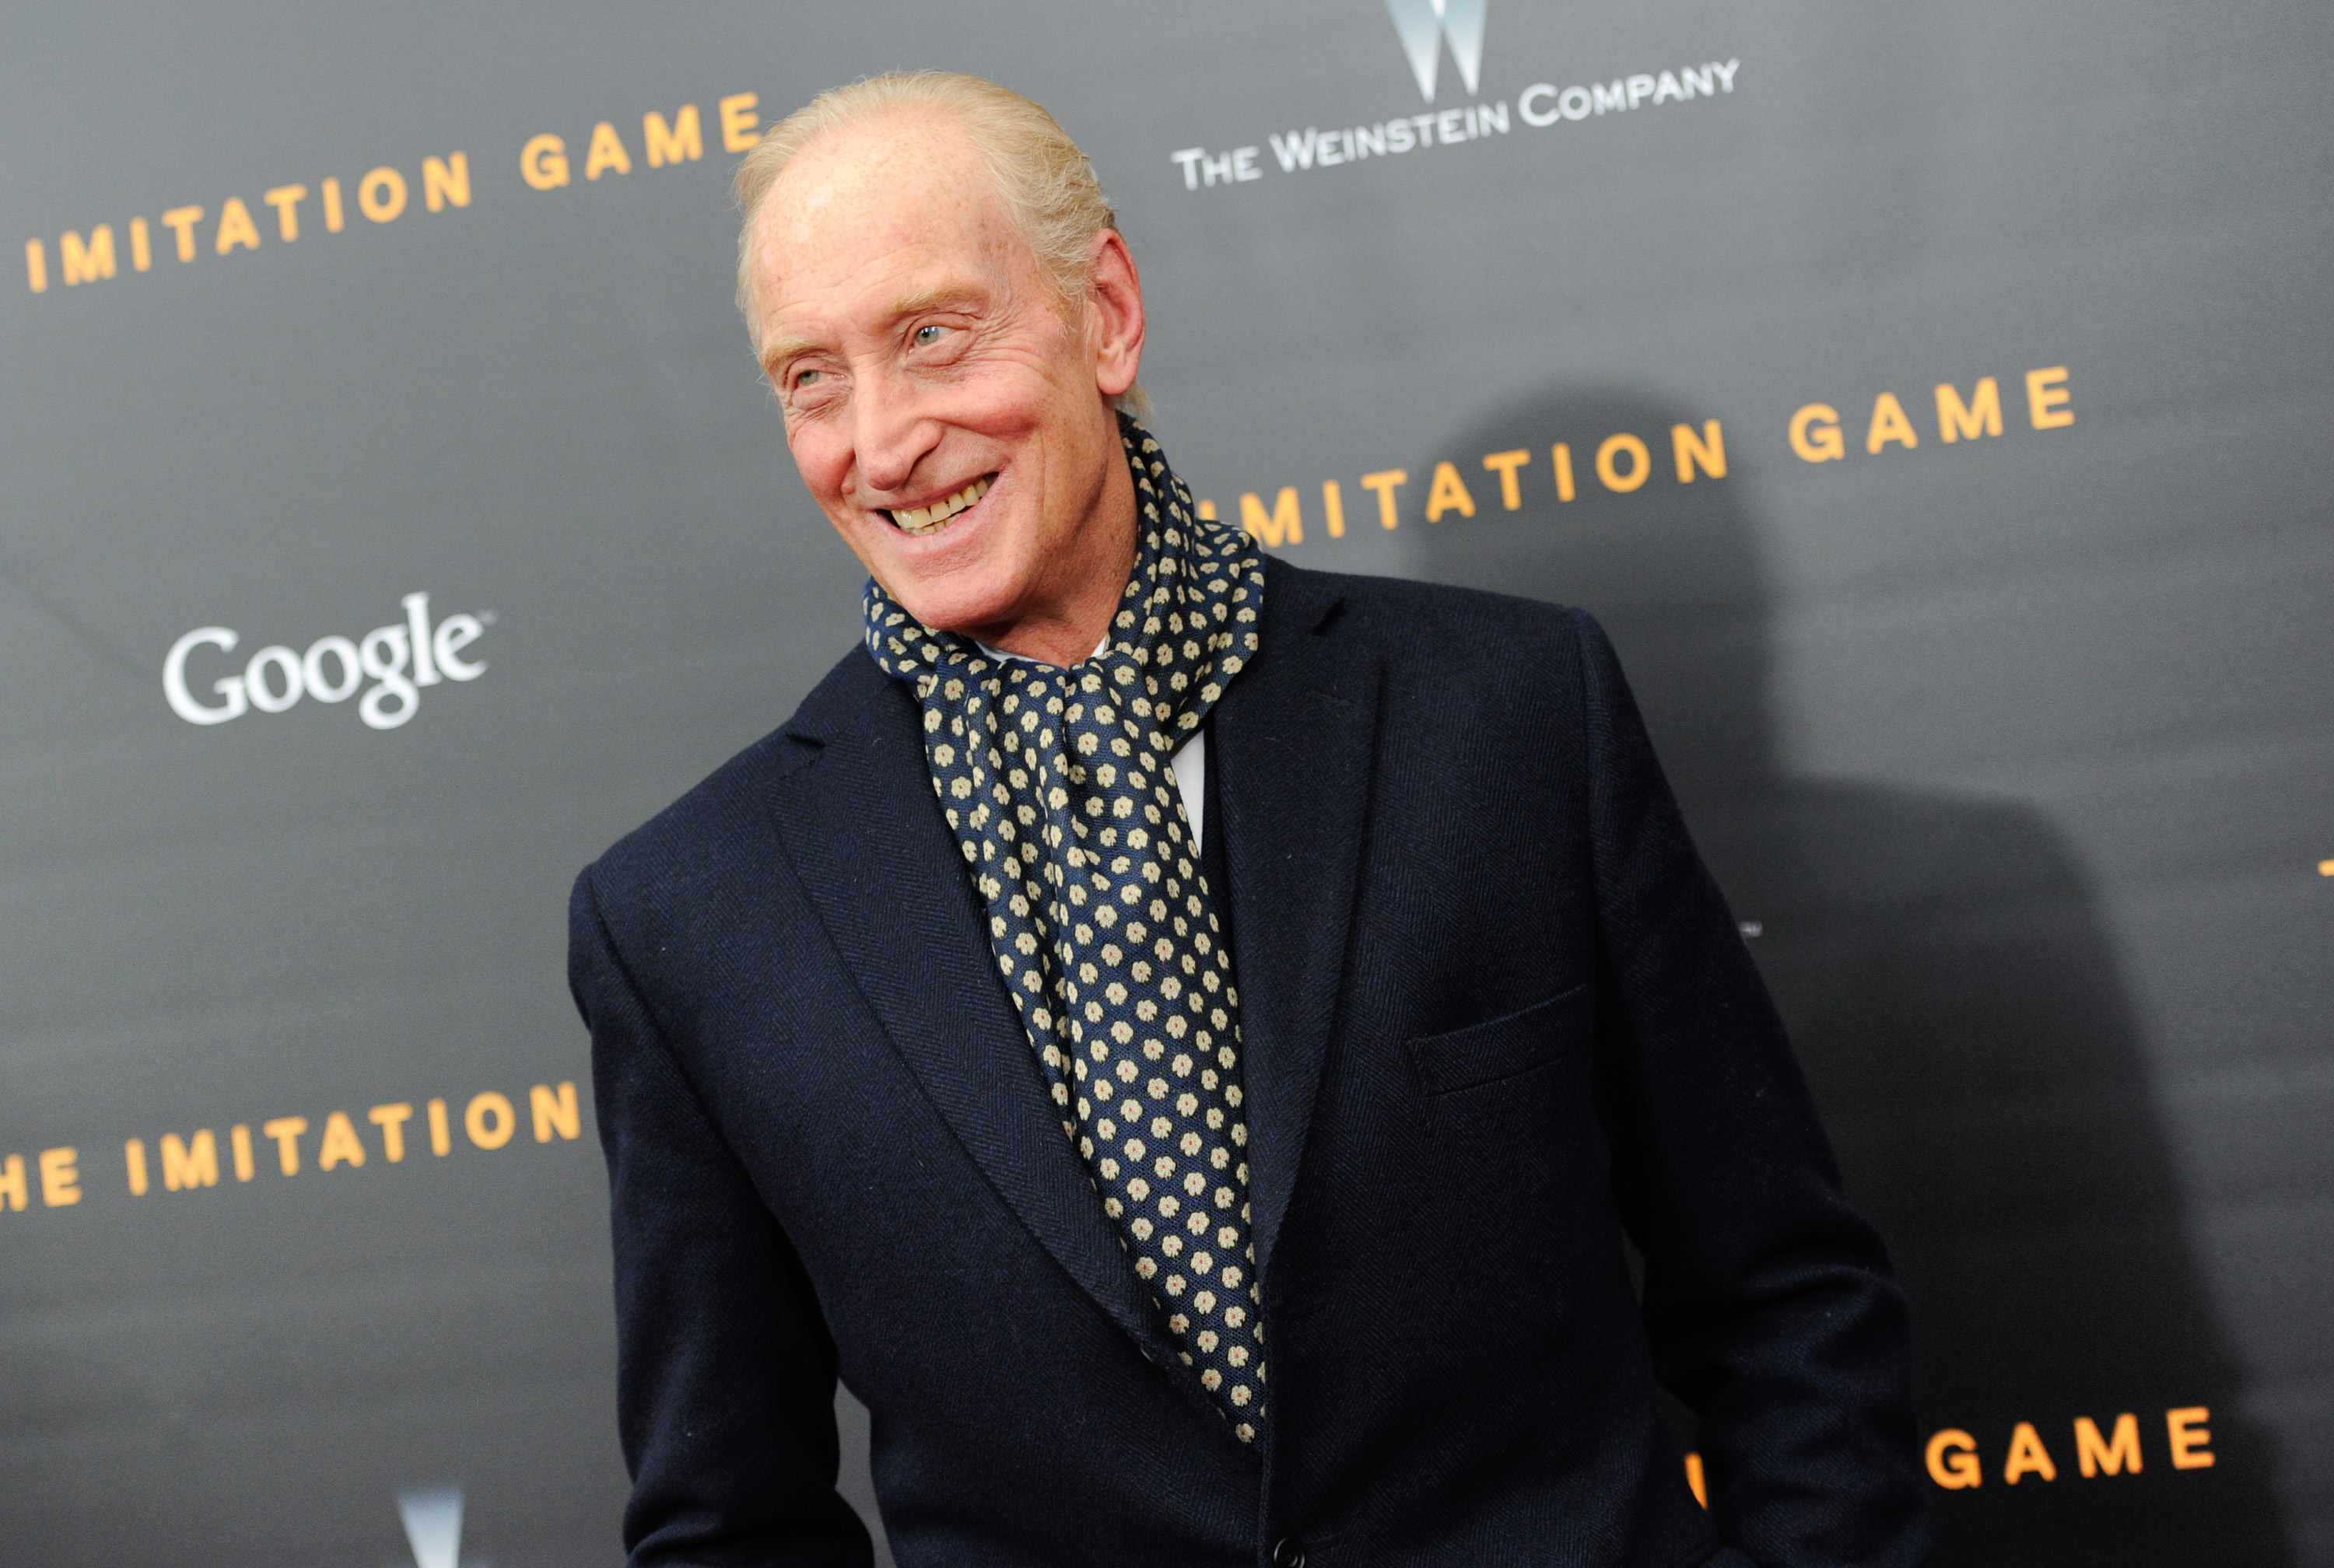 Actor Charles Dance attends the premiere of "The Imitation Game" at Ziegfeld Theatre on Monday, Nov. 17, 2014, in New York. (Photo by Evan Agostini/Invision/AP) (Evan Agostini&mdash;Evan Agostini/Invision/AP)